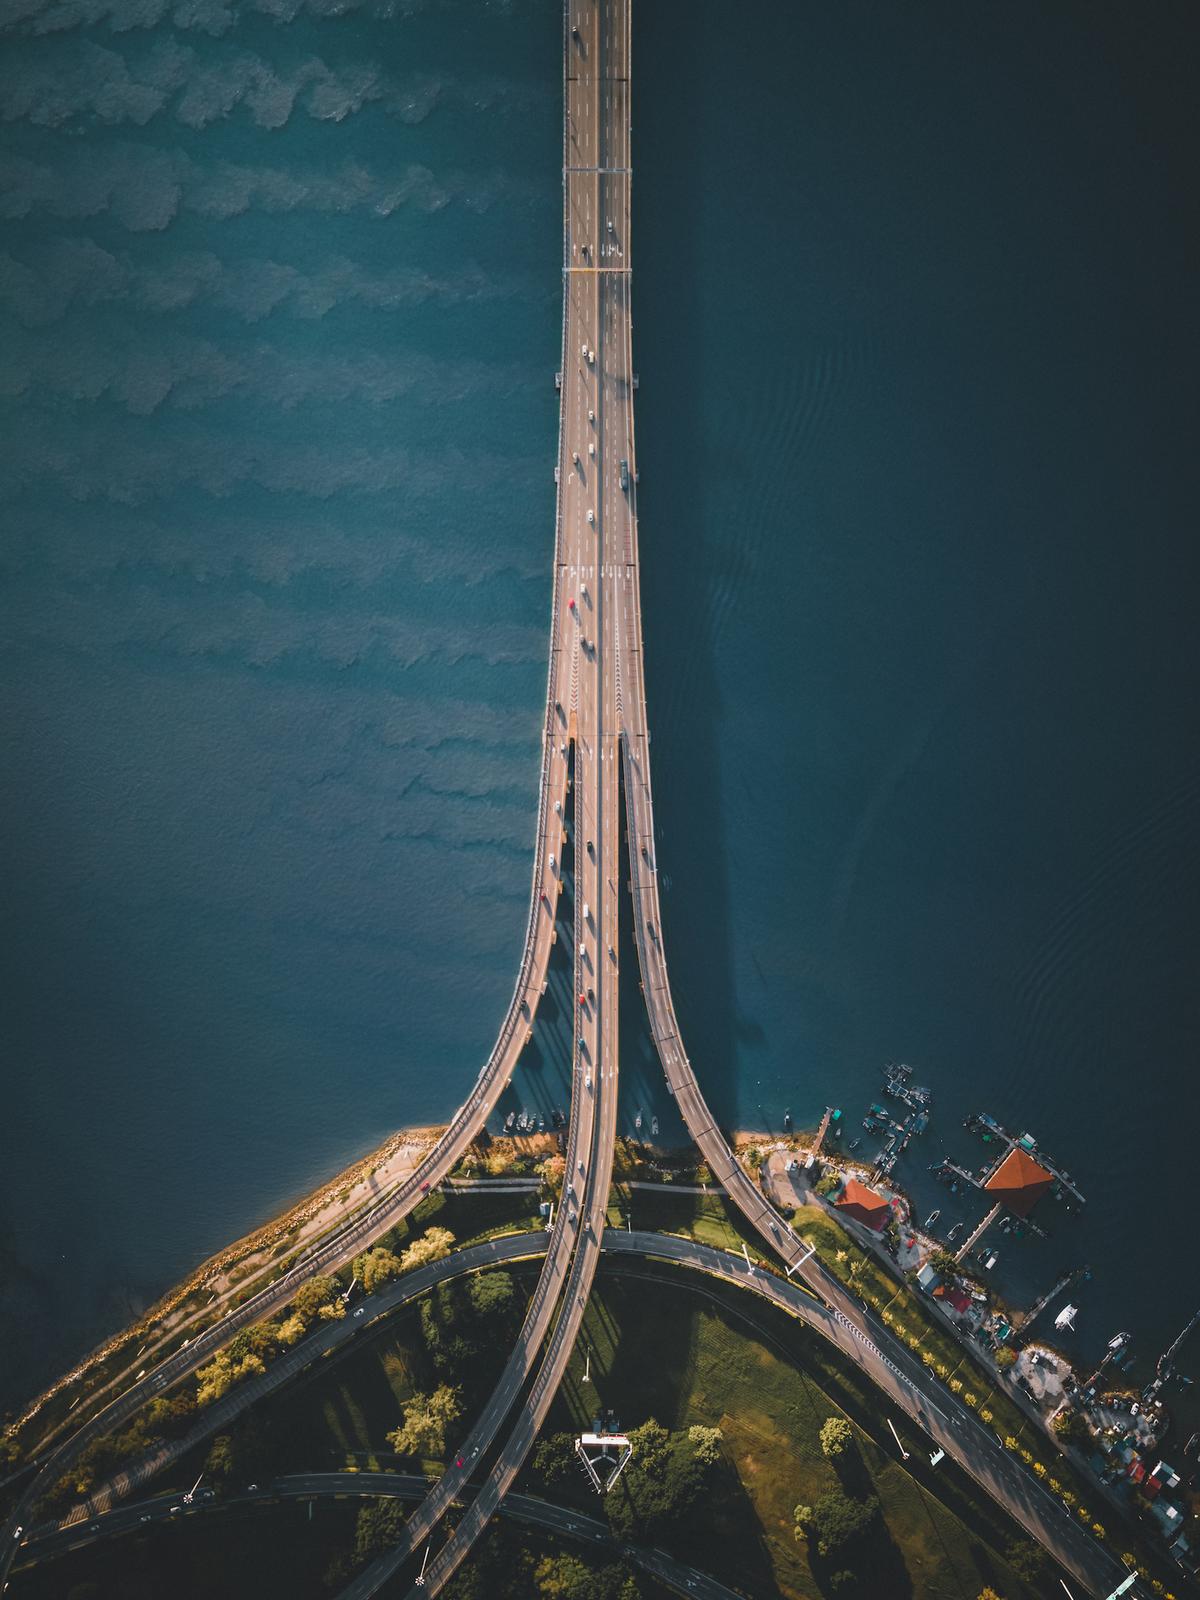 "A Top Down View of Penang’s First Bridge" by Yih Chang Chew, Malaysia; "The 13.5-km Penang bridge highway is the second-longest bridge in Malaysia. It was built in 1985 and until 2014 it was the only road connection between Peninsular Malaysia and Penang Island. Here it’s seen from the island end." (© Yih Chang Chew, Malaysia, Winner, National Awards, Architecture, 2022 Sony World Photography Awards)